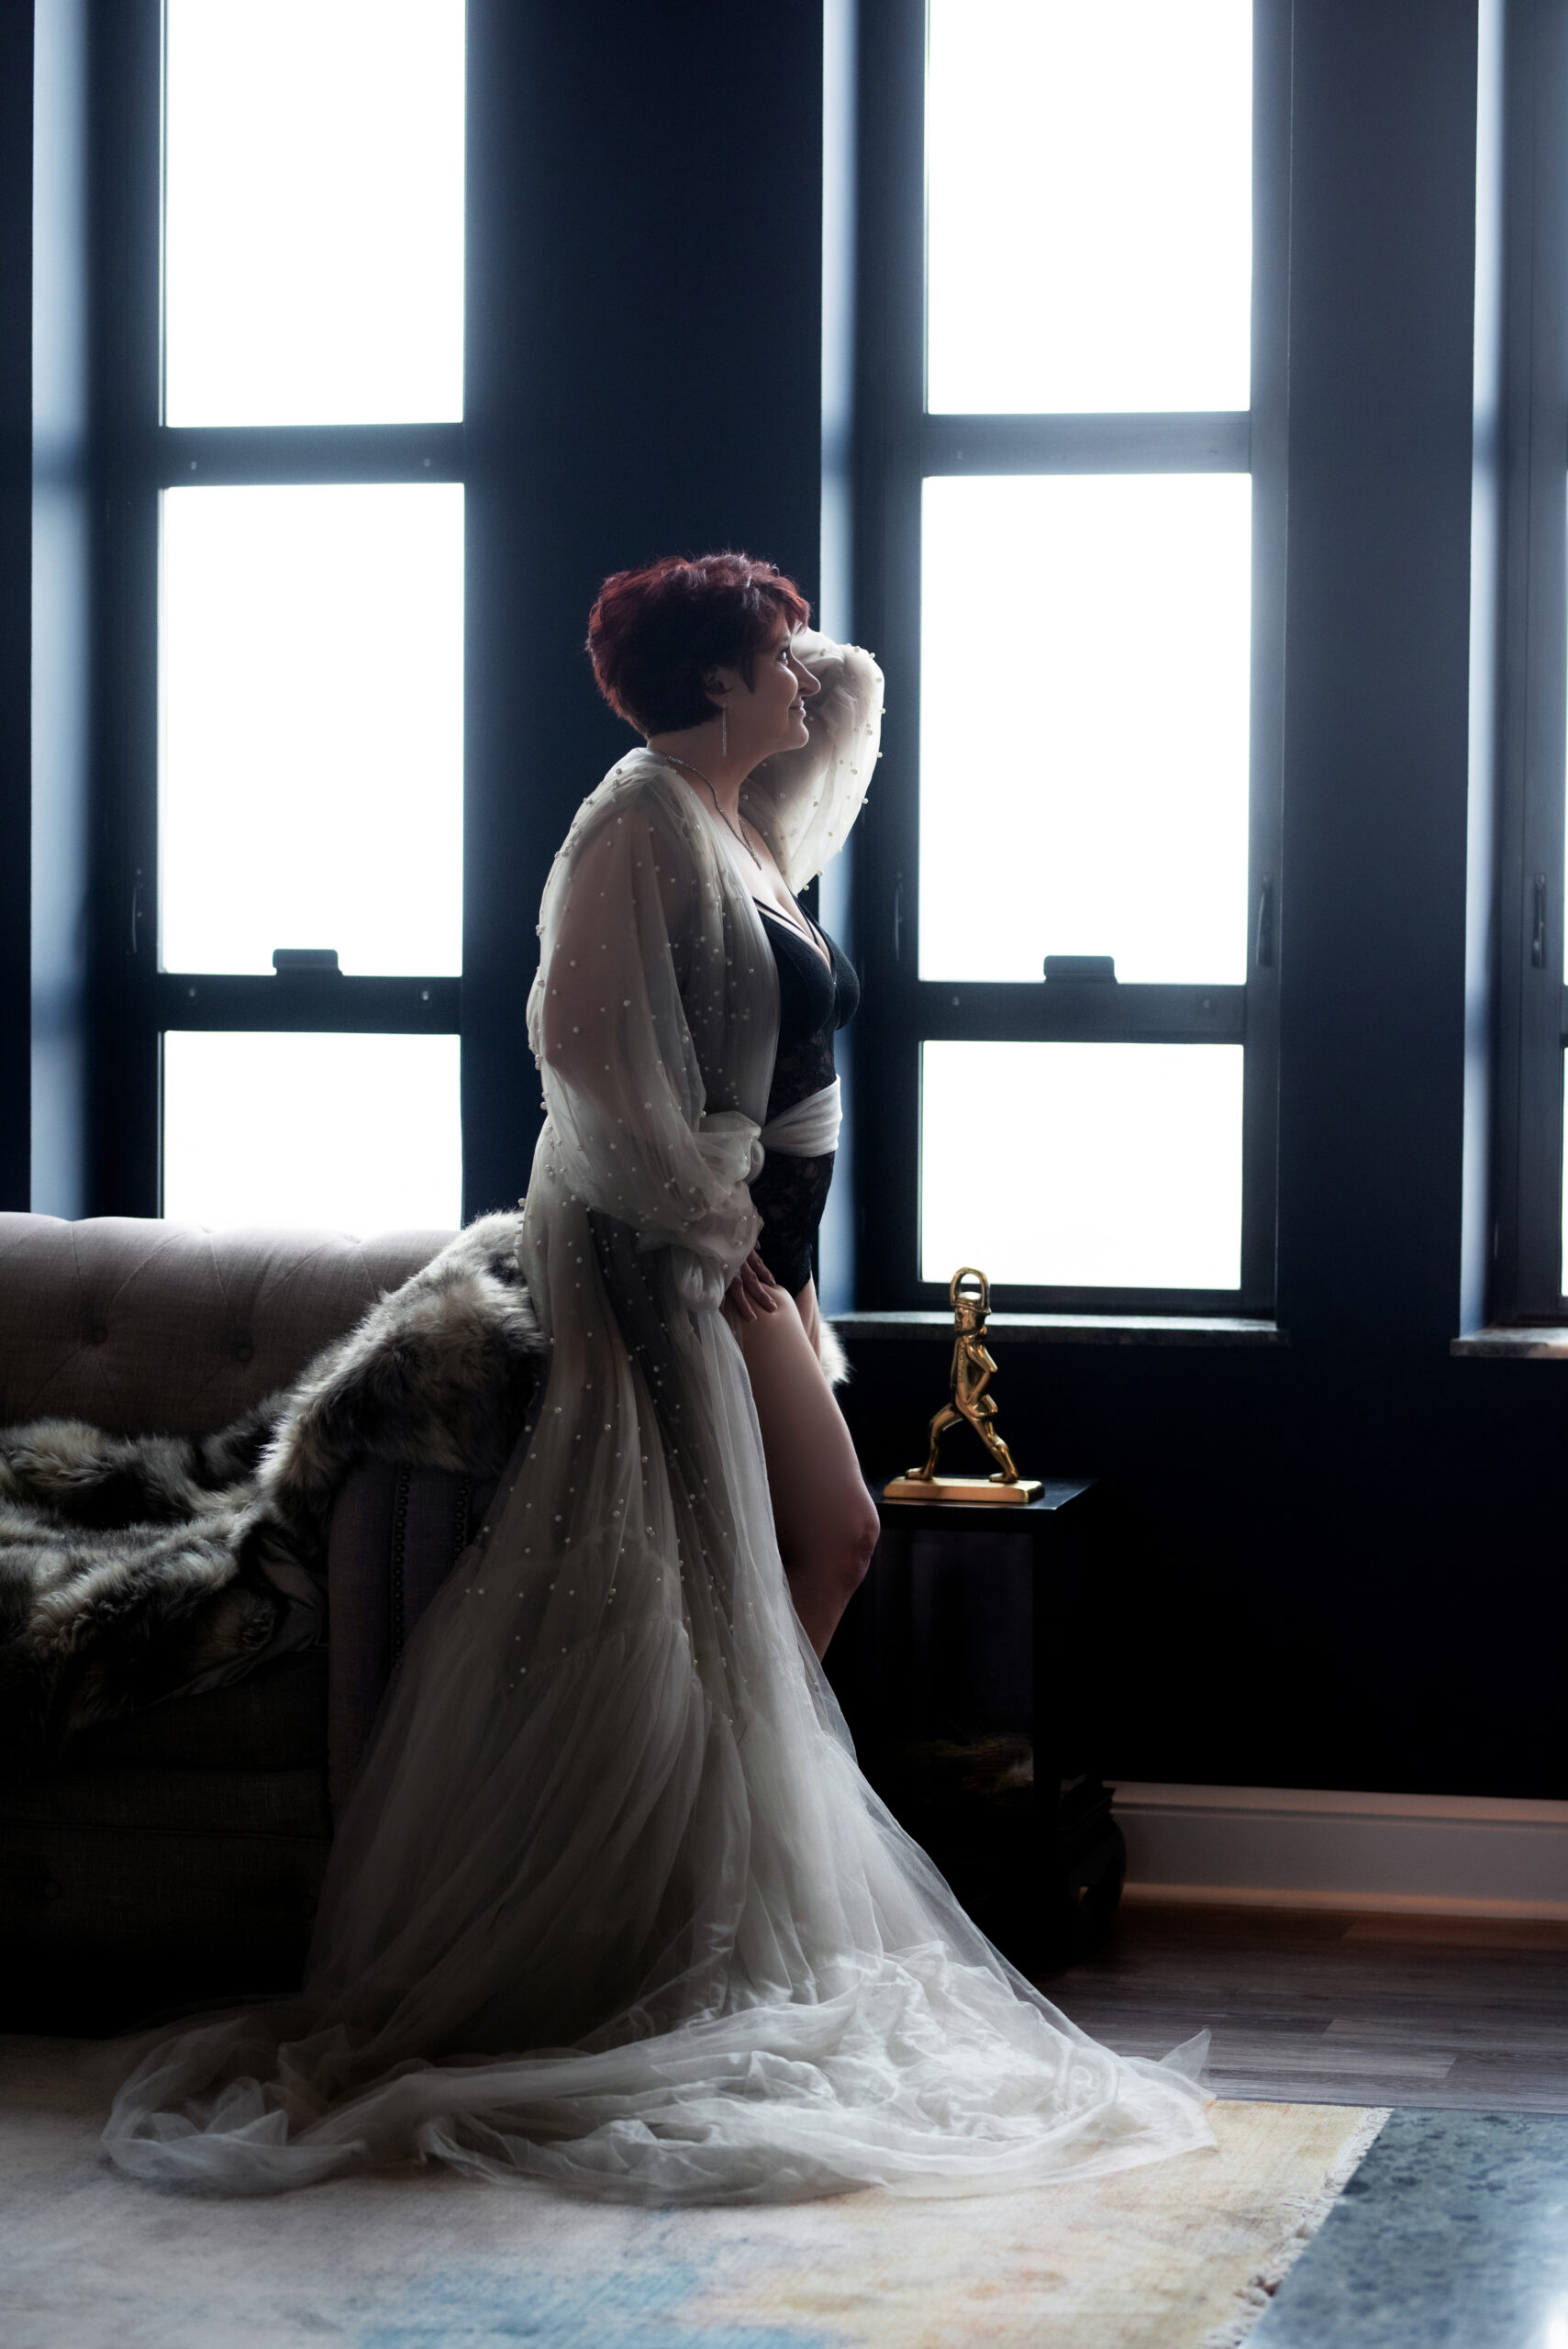 An older woman with short reddish-brown hair poses confidently in a gray pearl detail robe and a black lingerie set and high heels on the living room couch overlooking the view of downtown. The setting is the opulent Gatsby penthouse in Midtown, St. Louis, Missouri, owned by Josh Gould of Gould Holdings. The image was captured by Aloha Kelly of Love Exposed Boudoir.